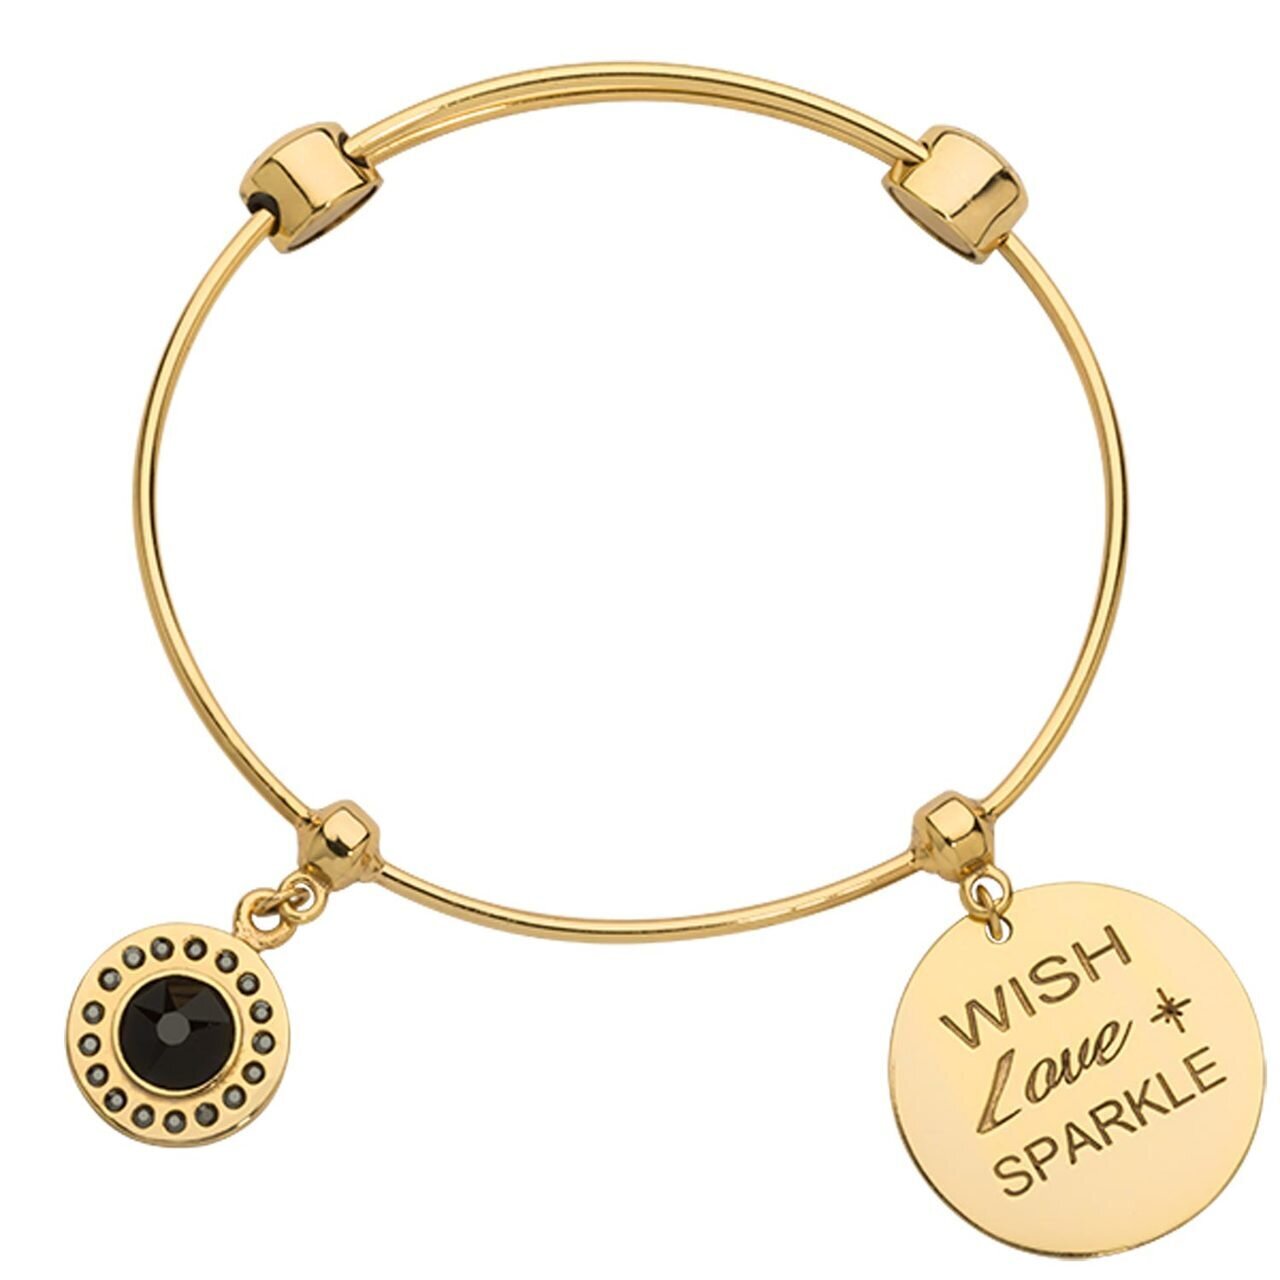 Nikki Lissoni Charm Bangle with Two Fixed Charms Jet Black Wish Love Sparkle Gold-plated 17cm B1142G17